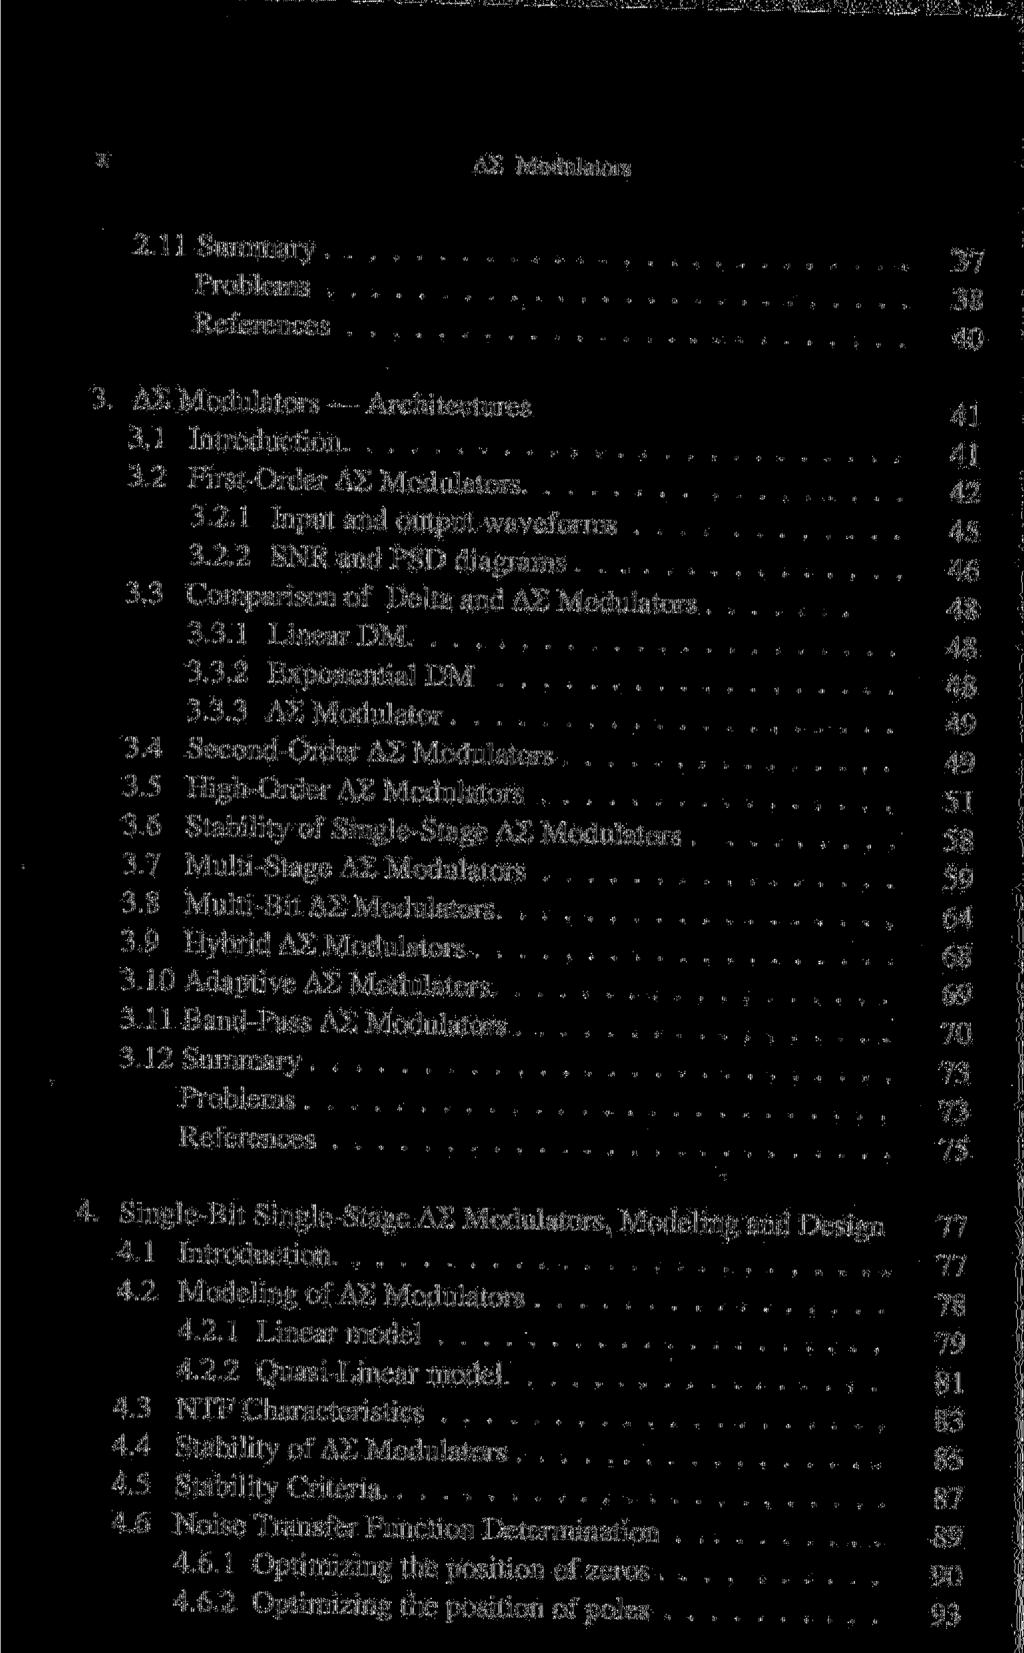 X AS Modulators 2.11Summary 37 Problems 3g 4Q 3. AS Modulators Architectures 41 3.1 Introduction 4i 3.2 First-Order AS Modulators 42 3.2.1 Input and output waveforms 45 3.2.2 SNR and PSD diagrams, ' '.